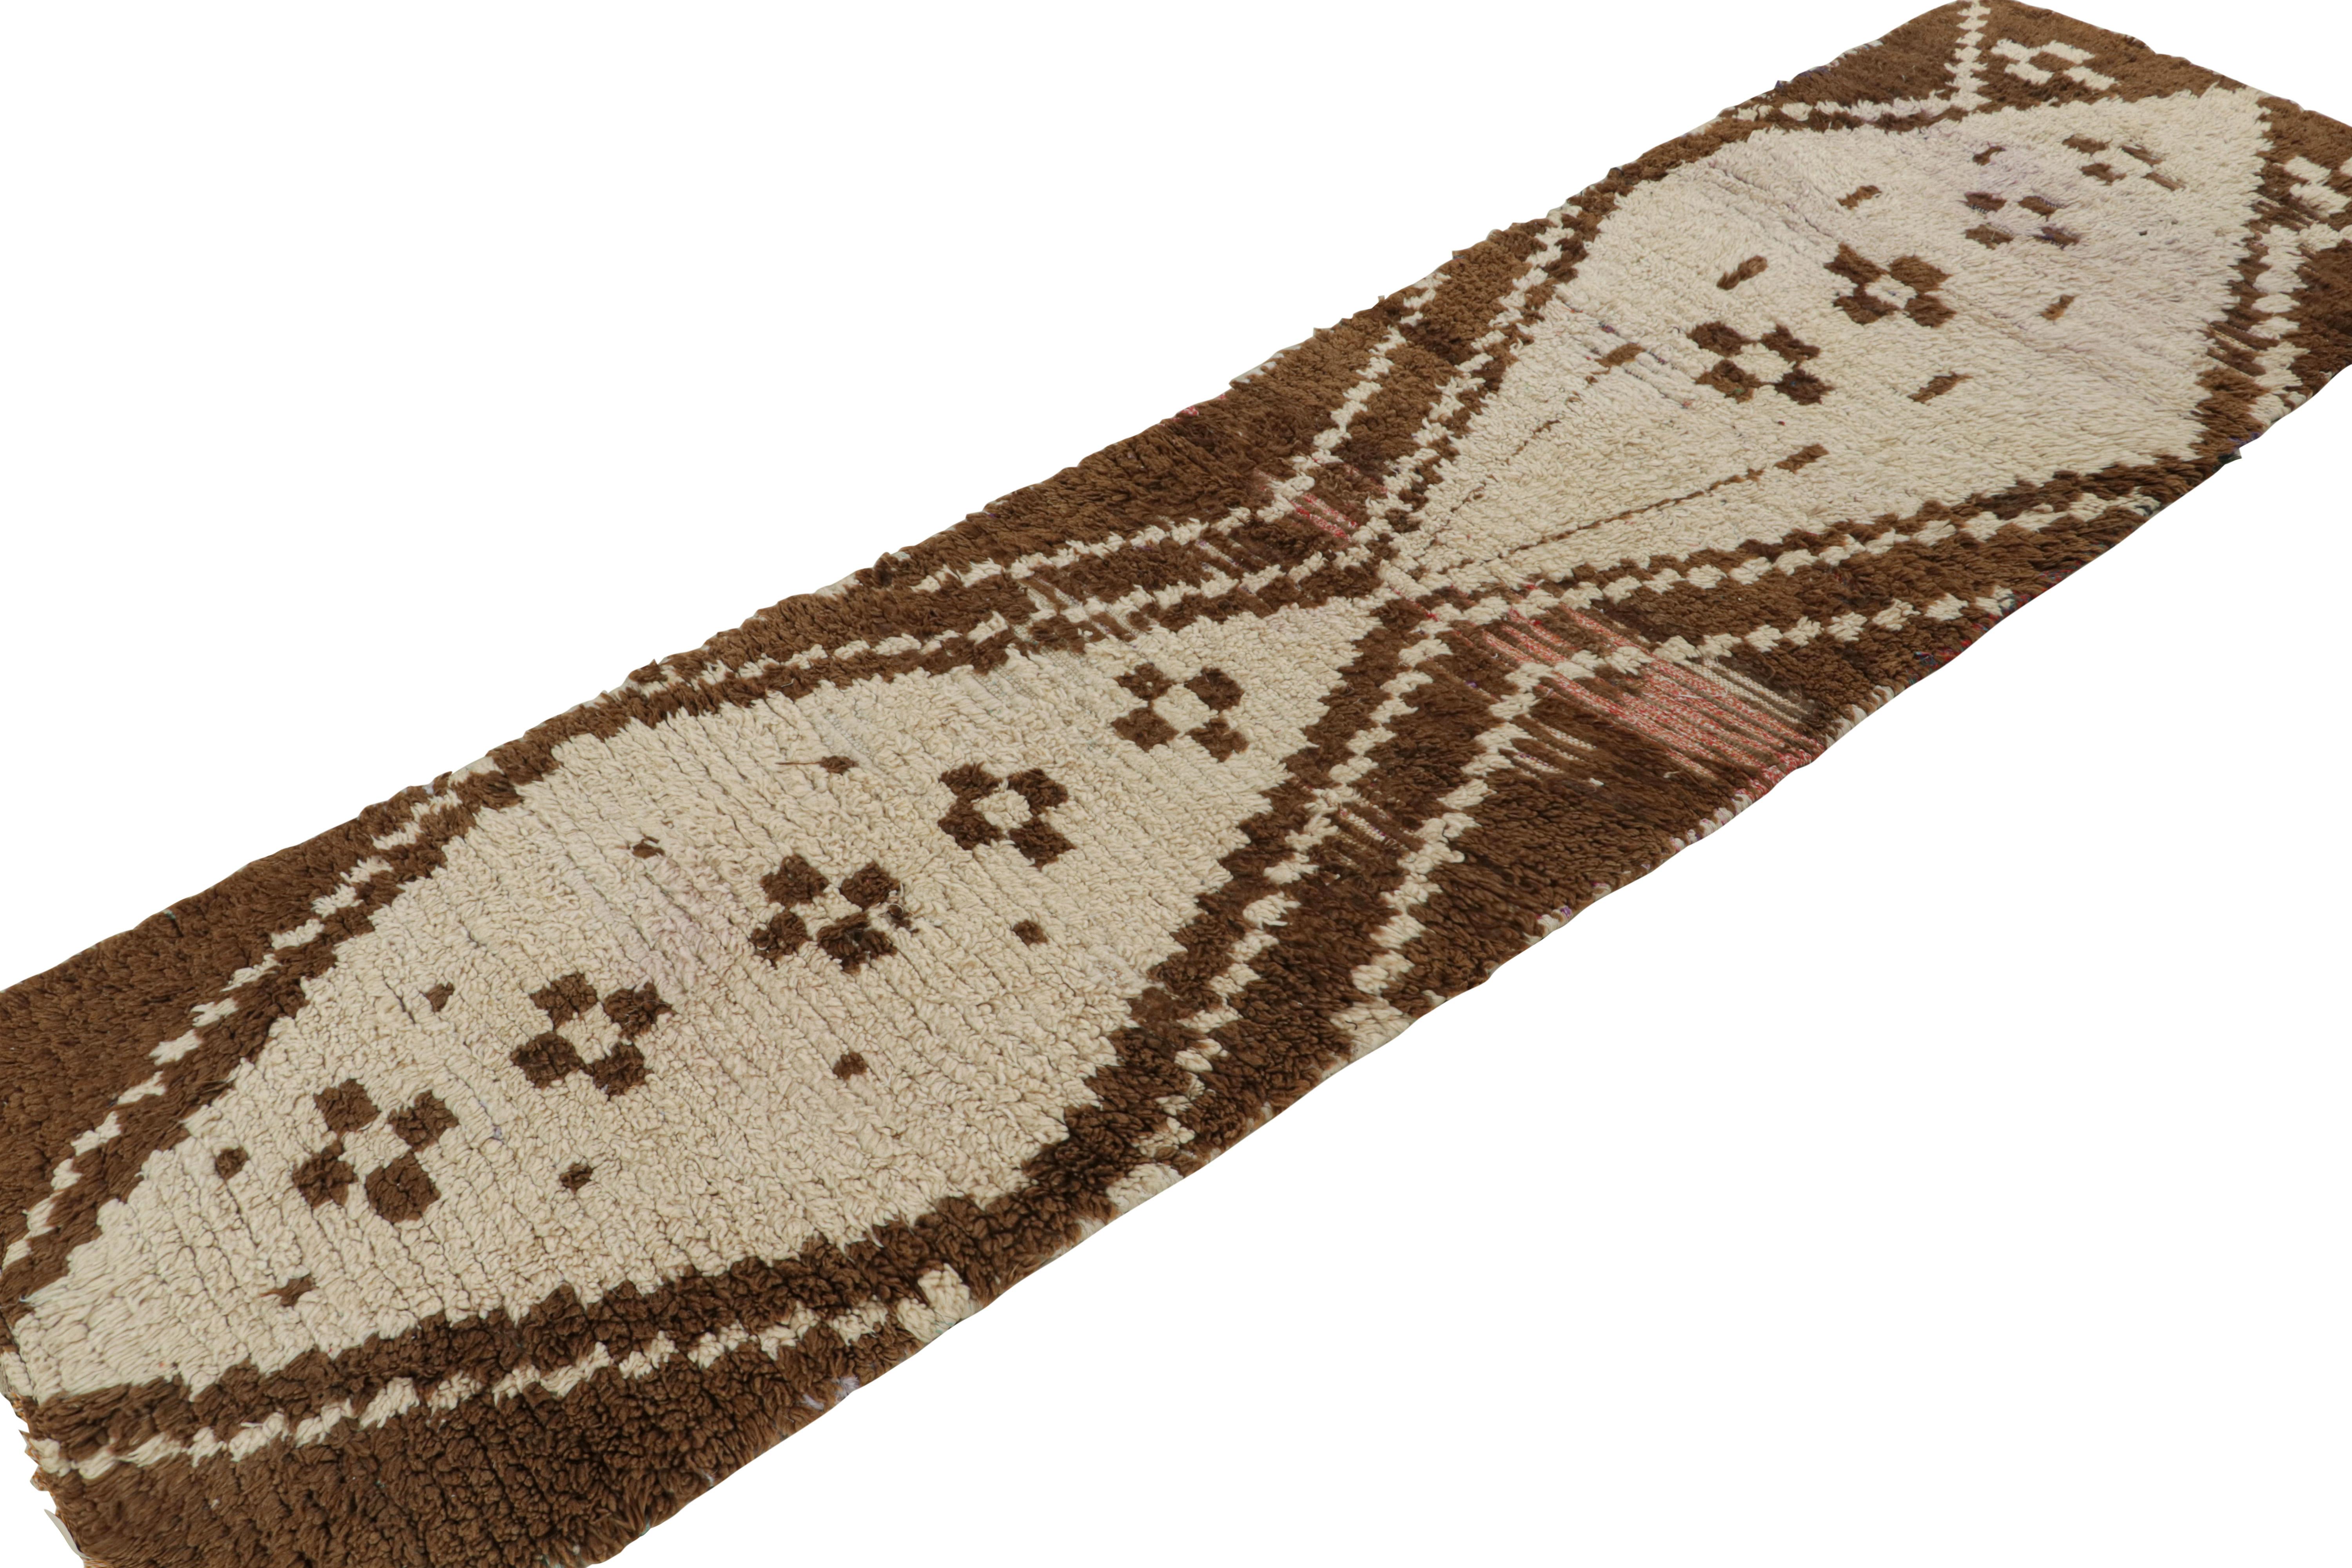 Hand-knotted in wool circa 1950-1960, this vintage 3x9 Moroccan runner is believed to hail from the Azilal tribe. 

On the Design: 

The runner enjoys beige-brown tribal patterns with subtle red punctuations. Keen eyes will further admire its sense